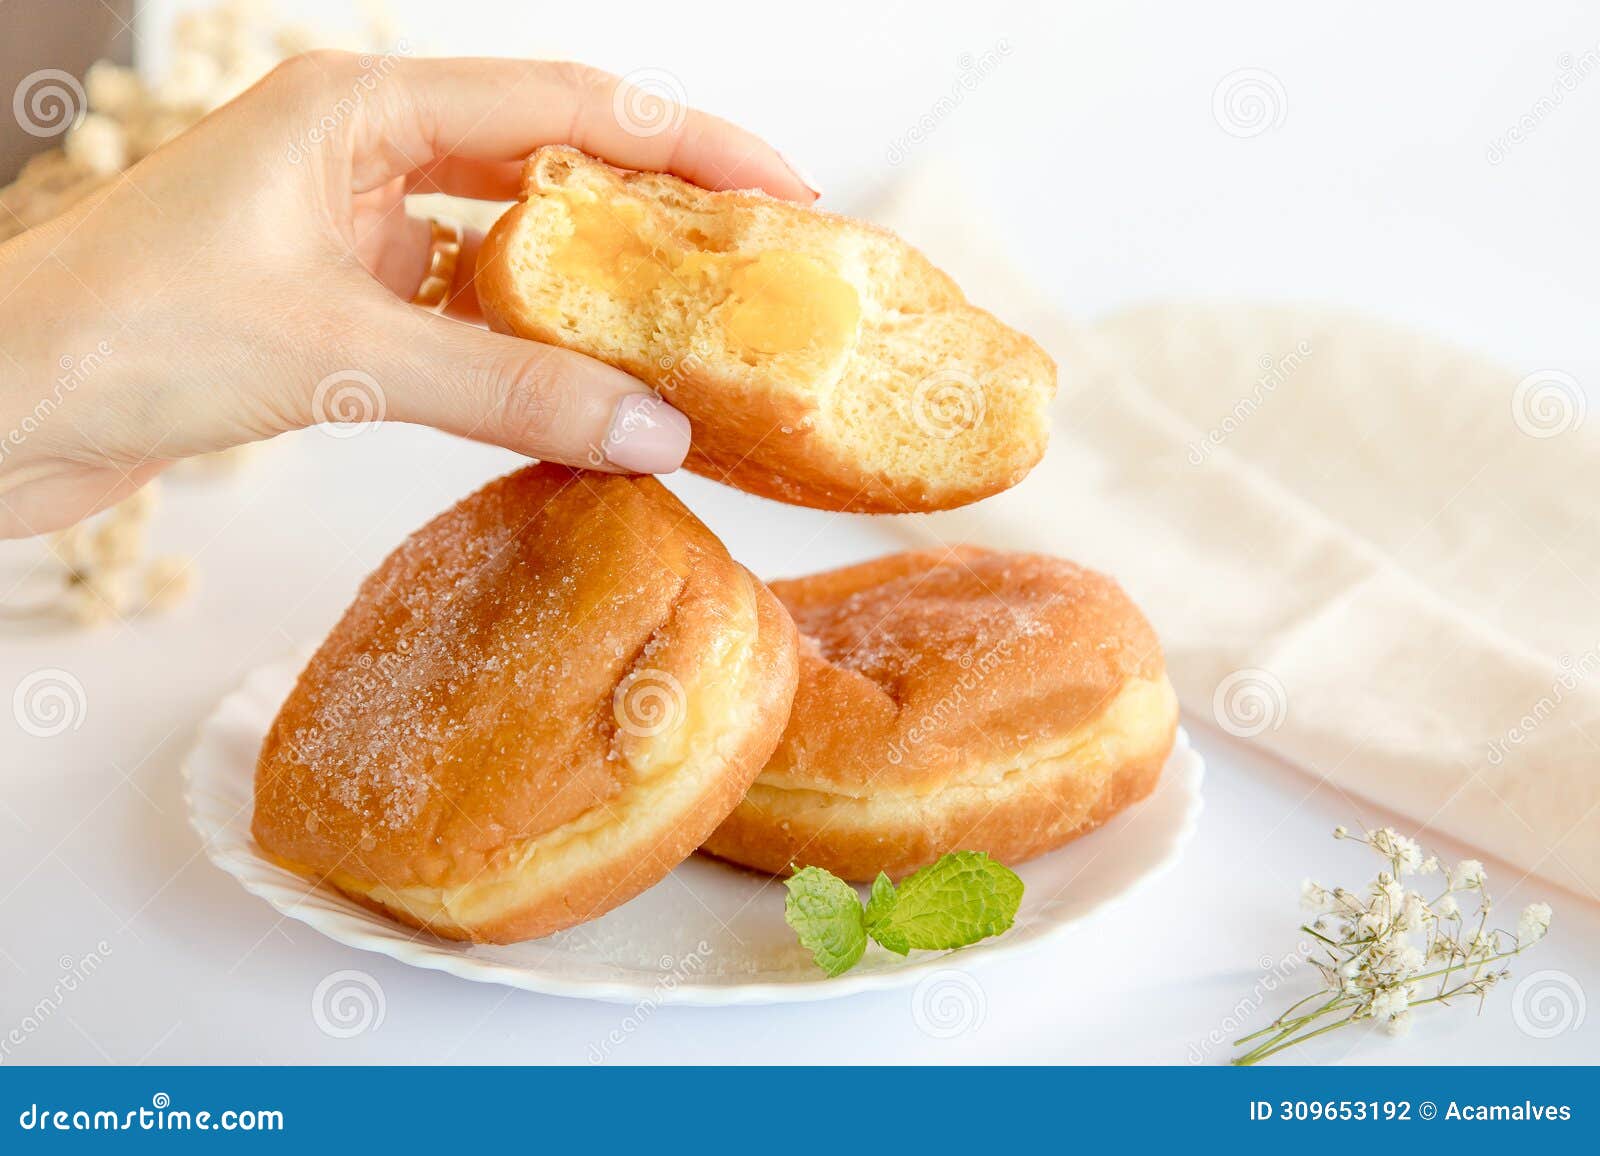 bolas de berlim, berliner or donuts filled with egg jam, a very popular dessert in portuguese pastry shops.